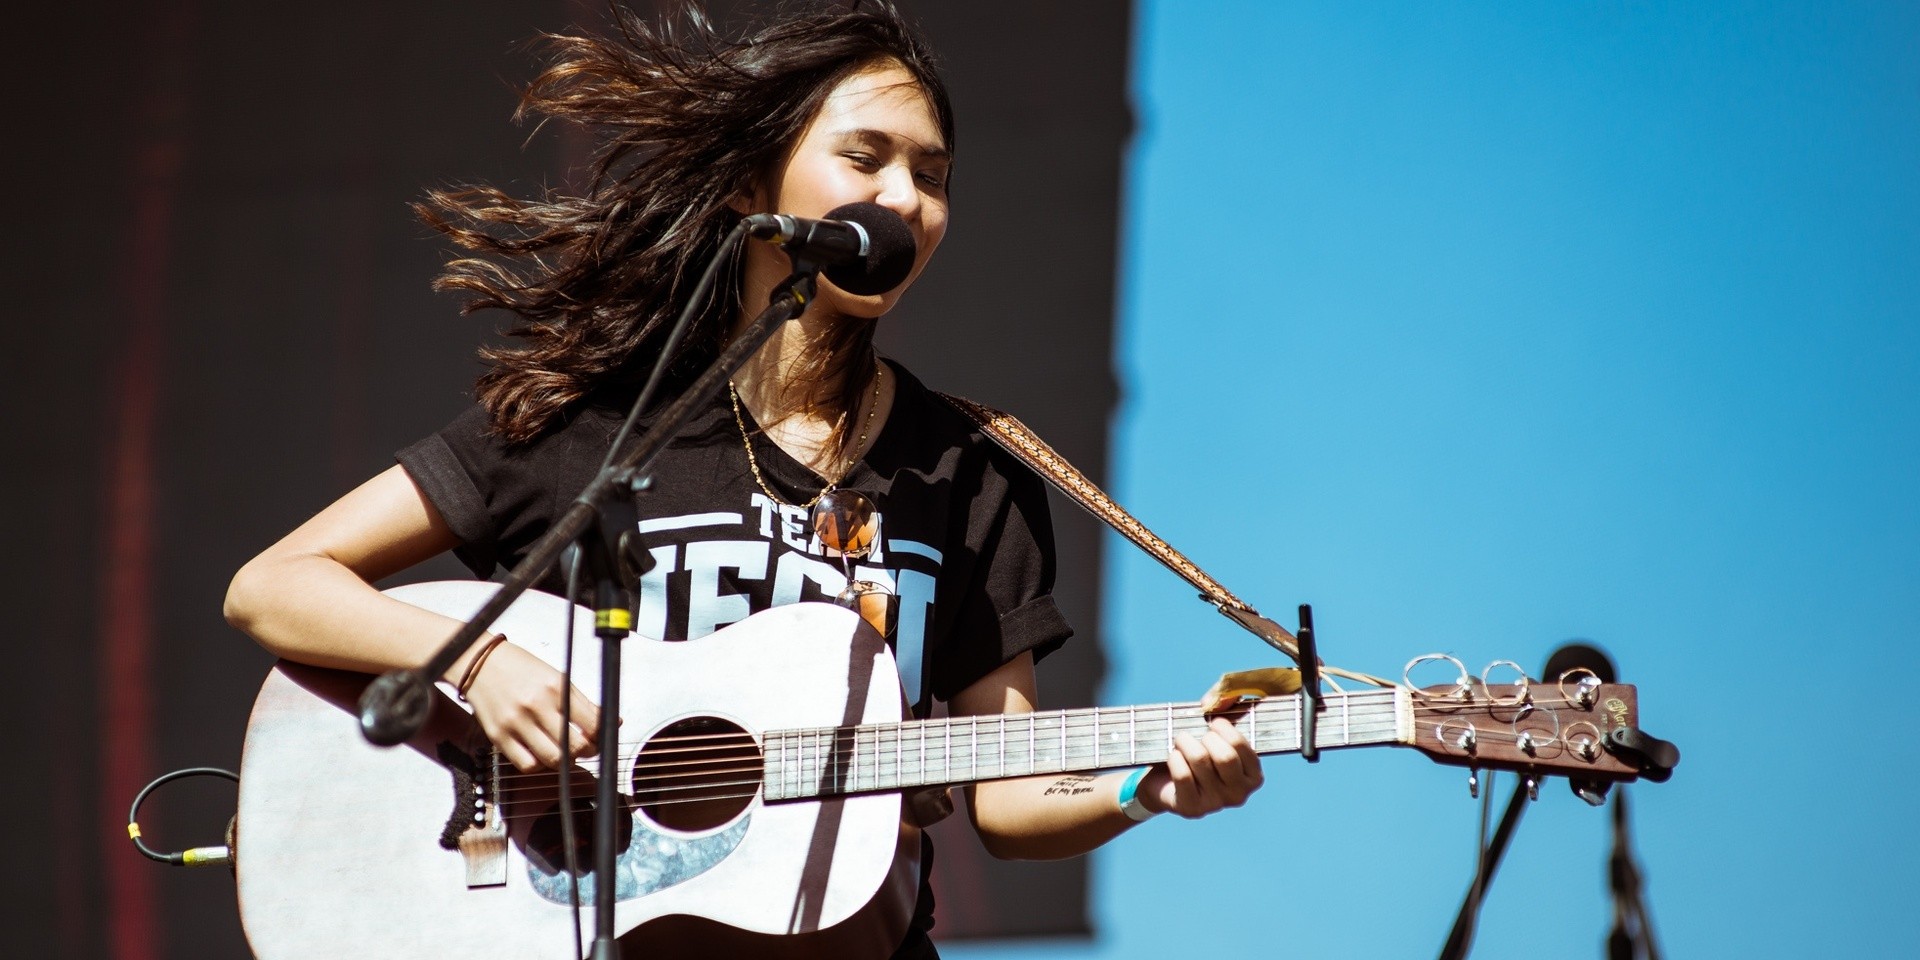 On the Record: The albums that shaped Clara Benin